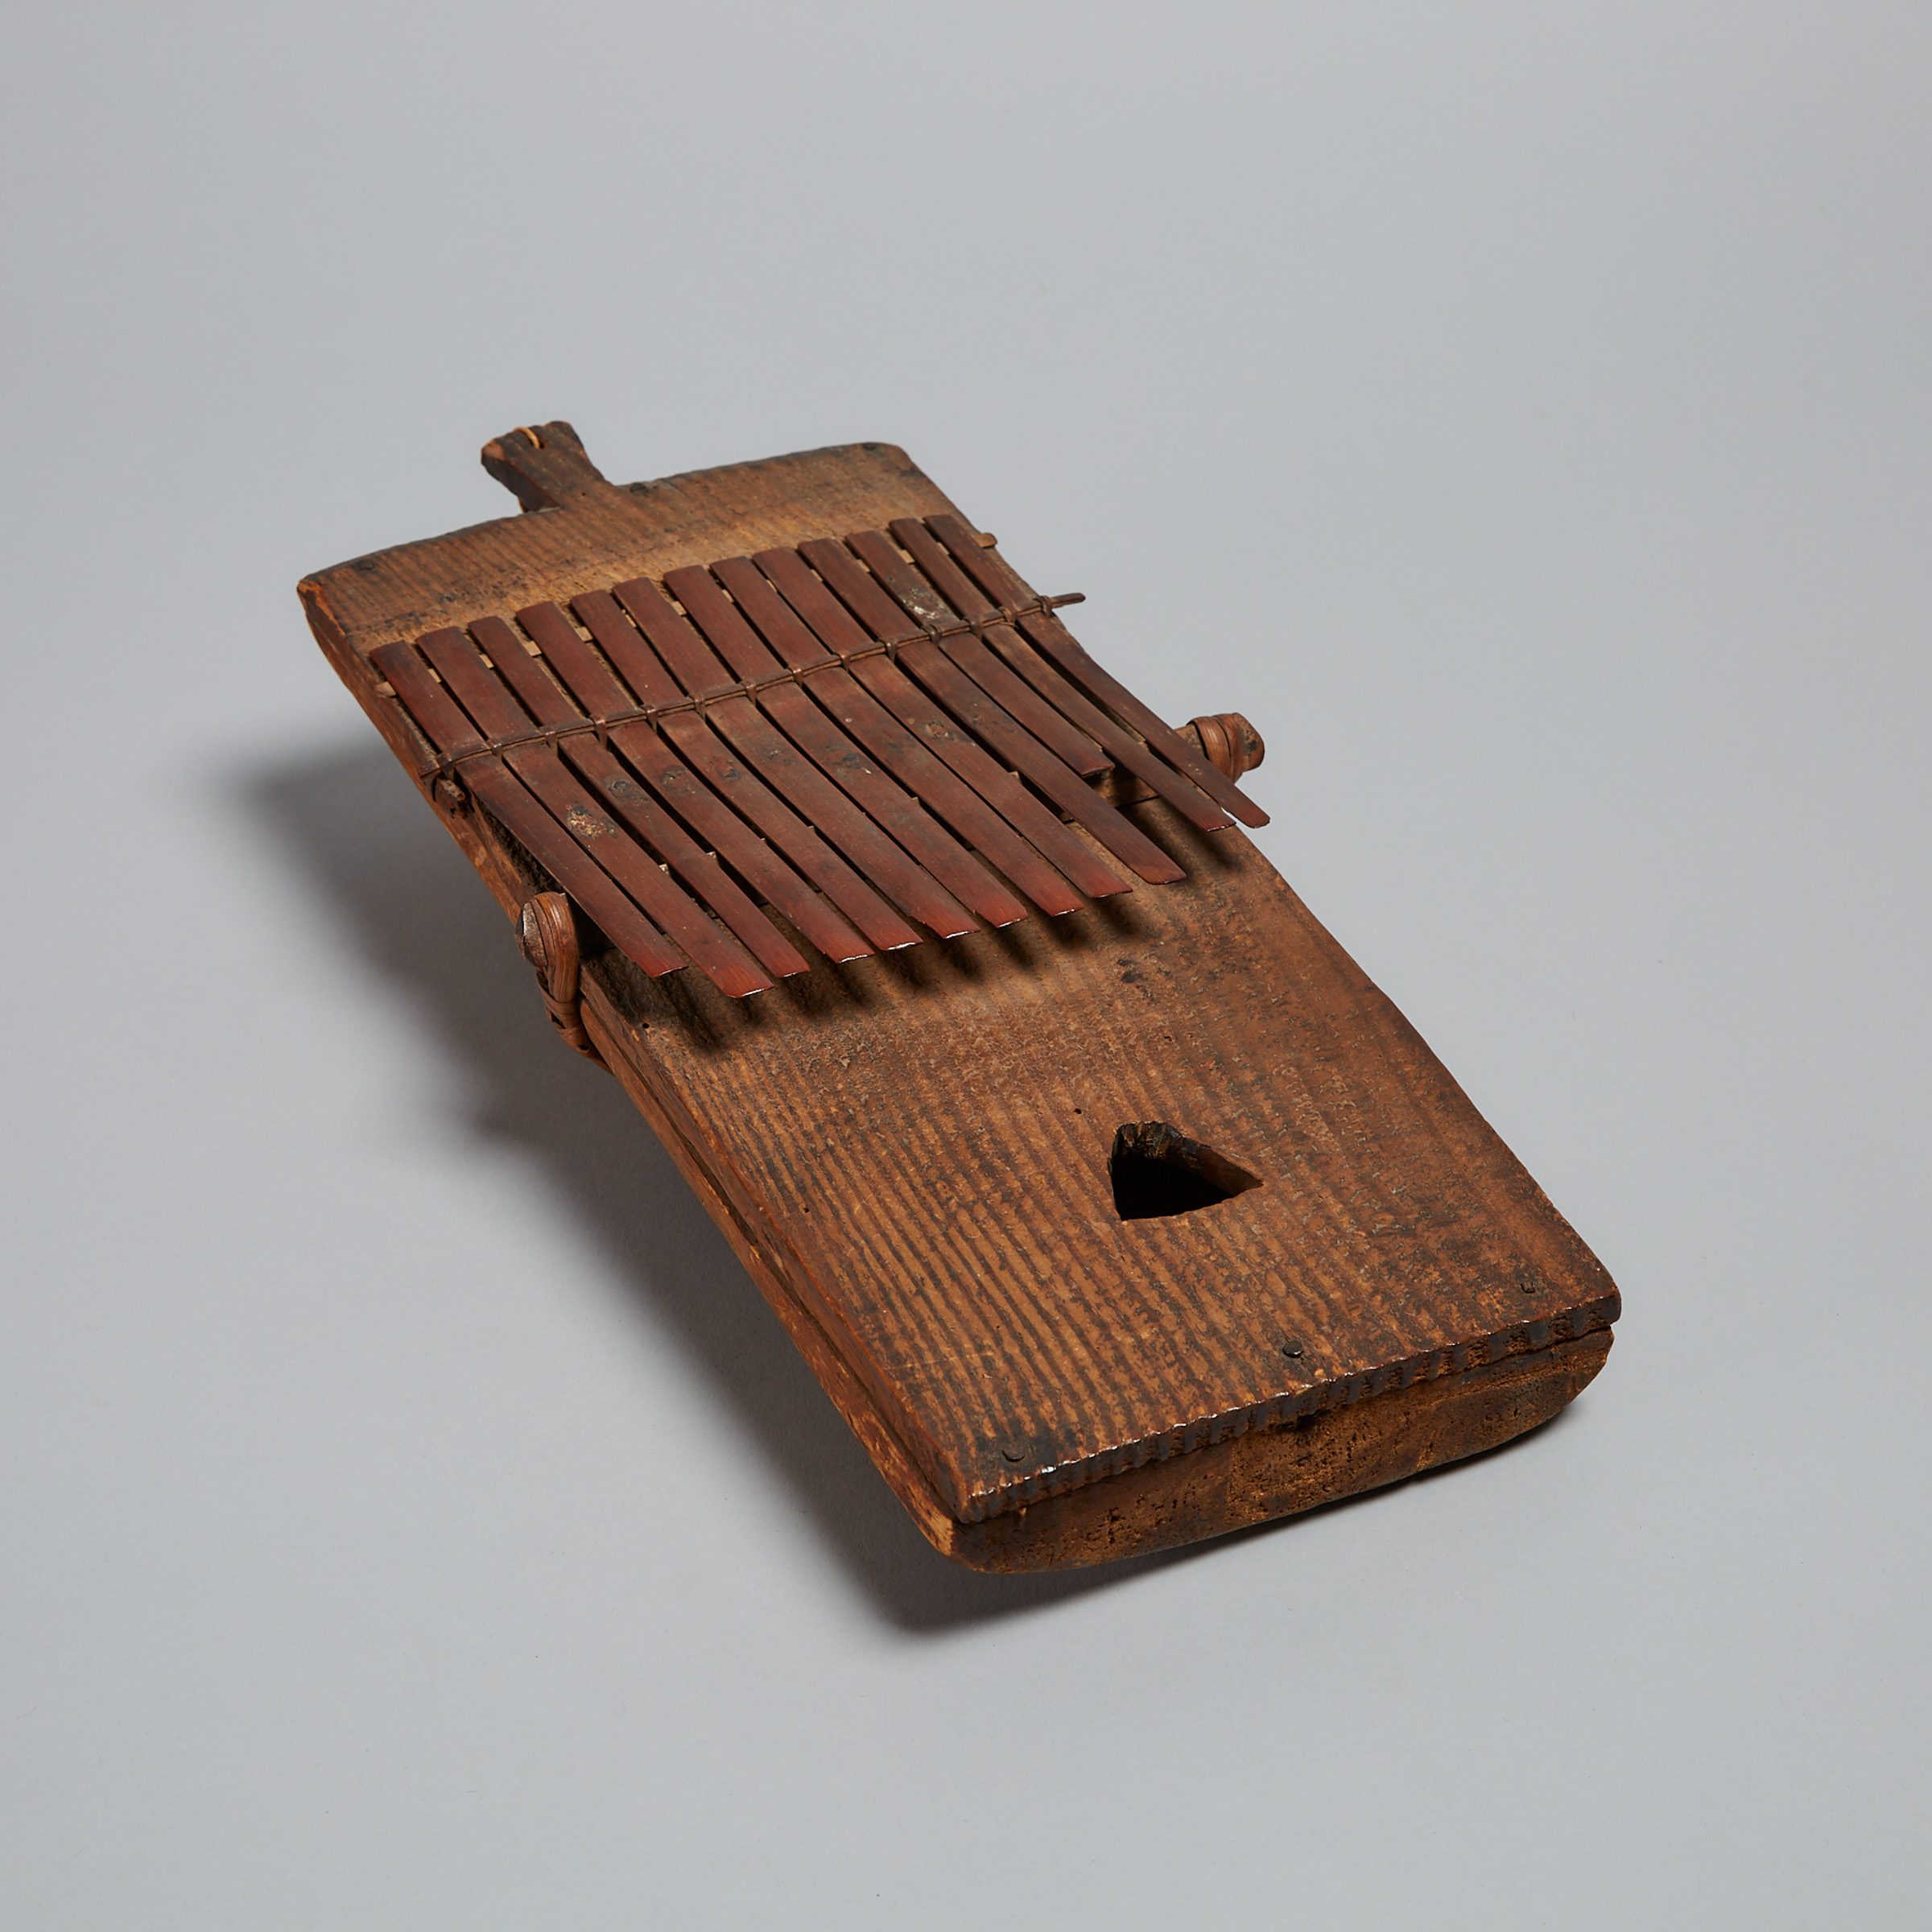 African Mbira (finger piano)